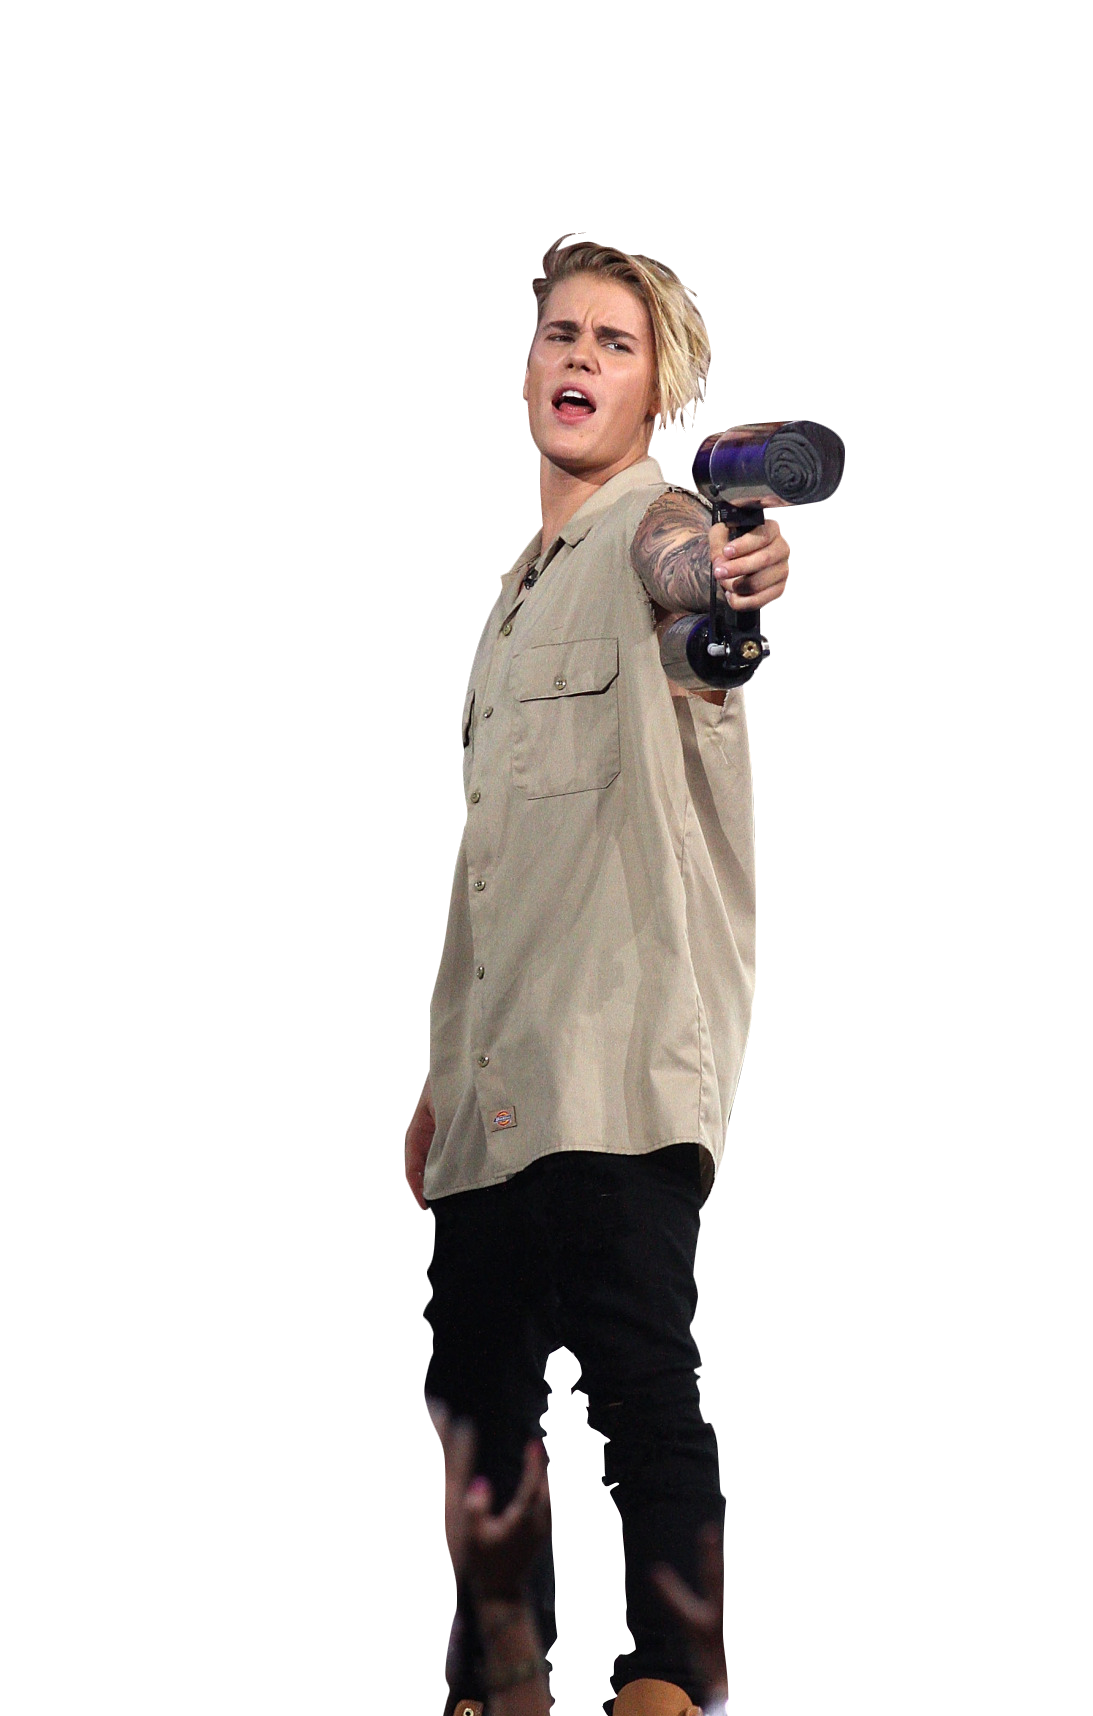 Justin Bieber Holding Gas Canone